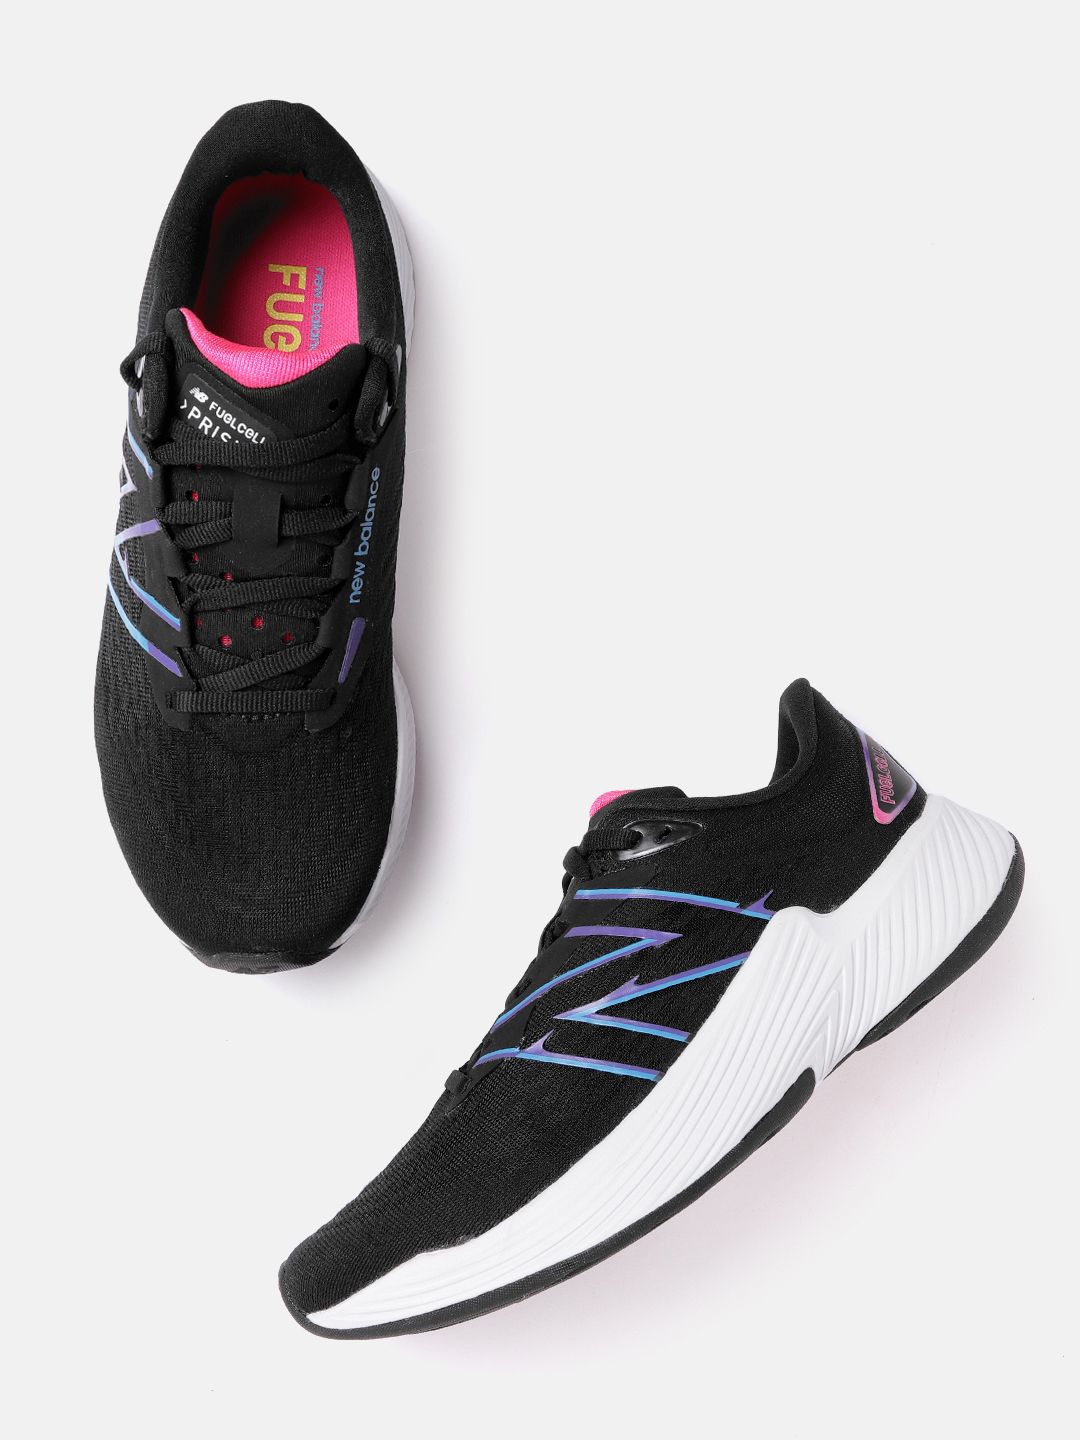 New Balance Women Black & Blue Prism Running Shoes Price in India